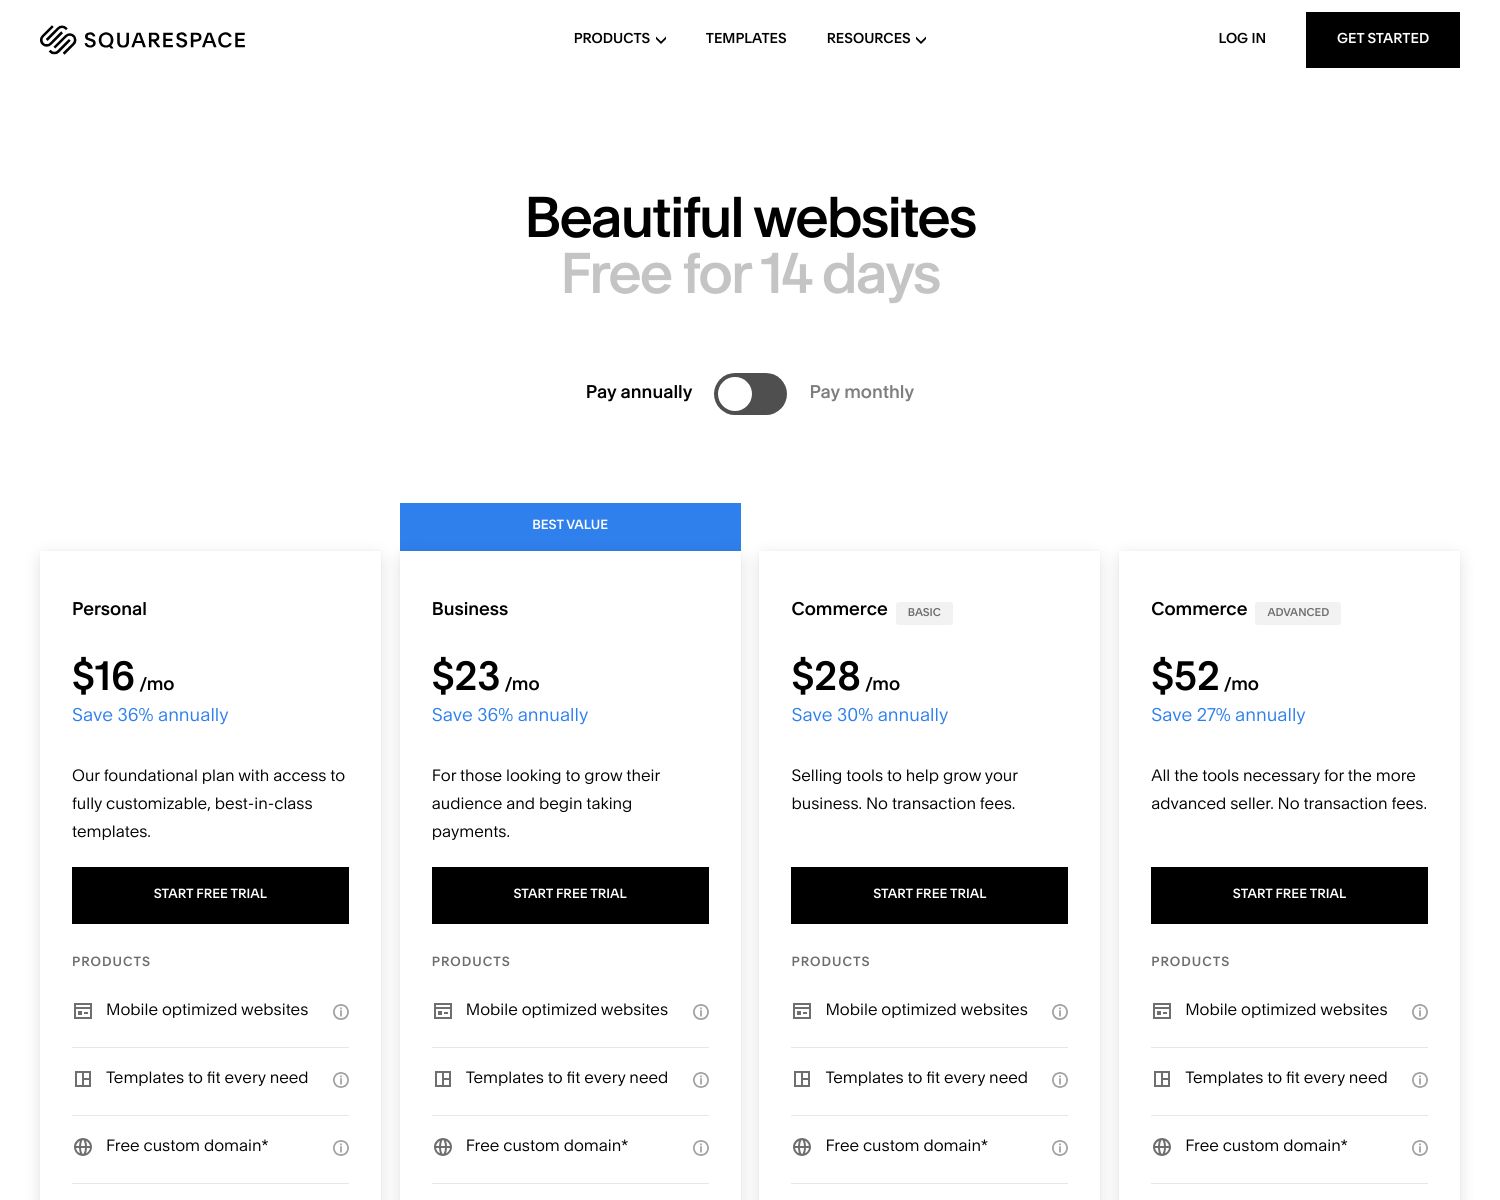 The Squarespace pricing page